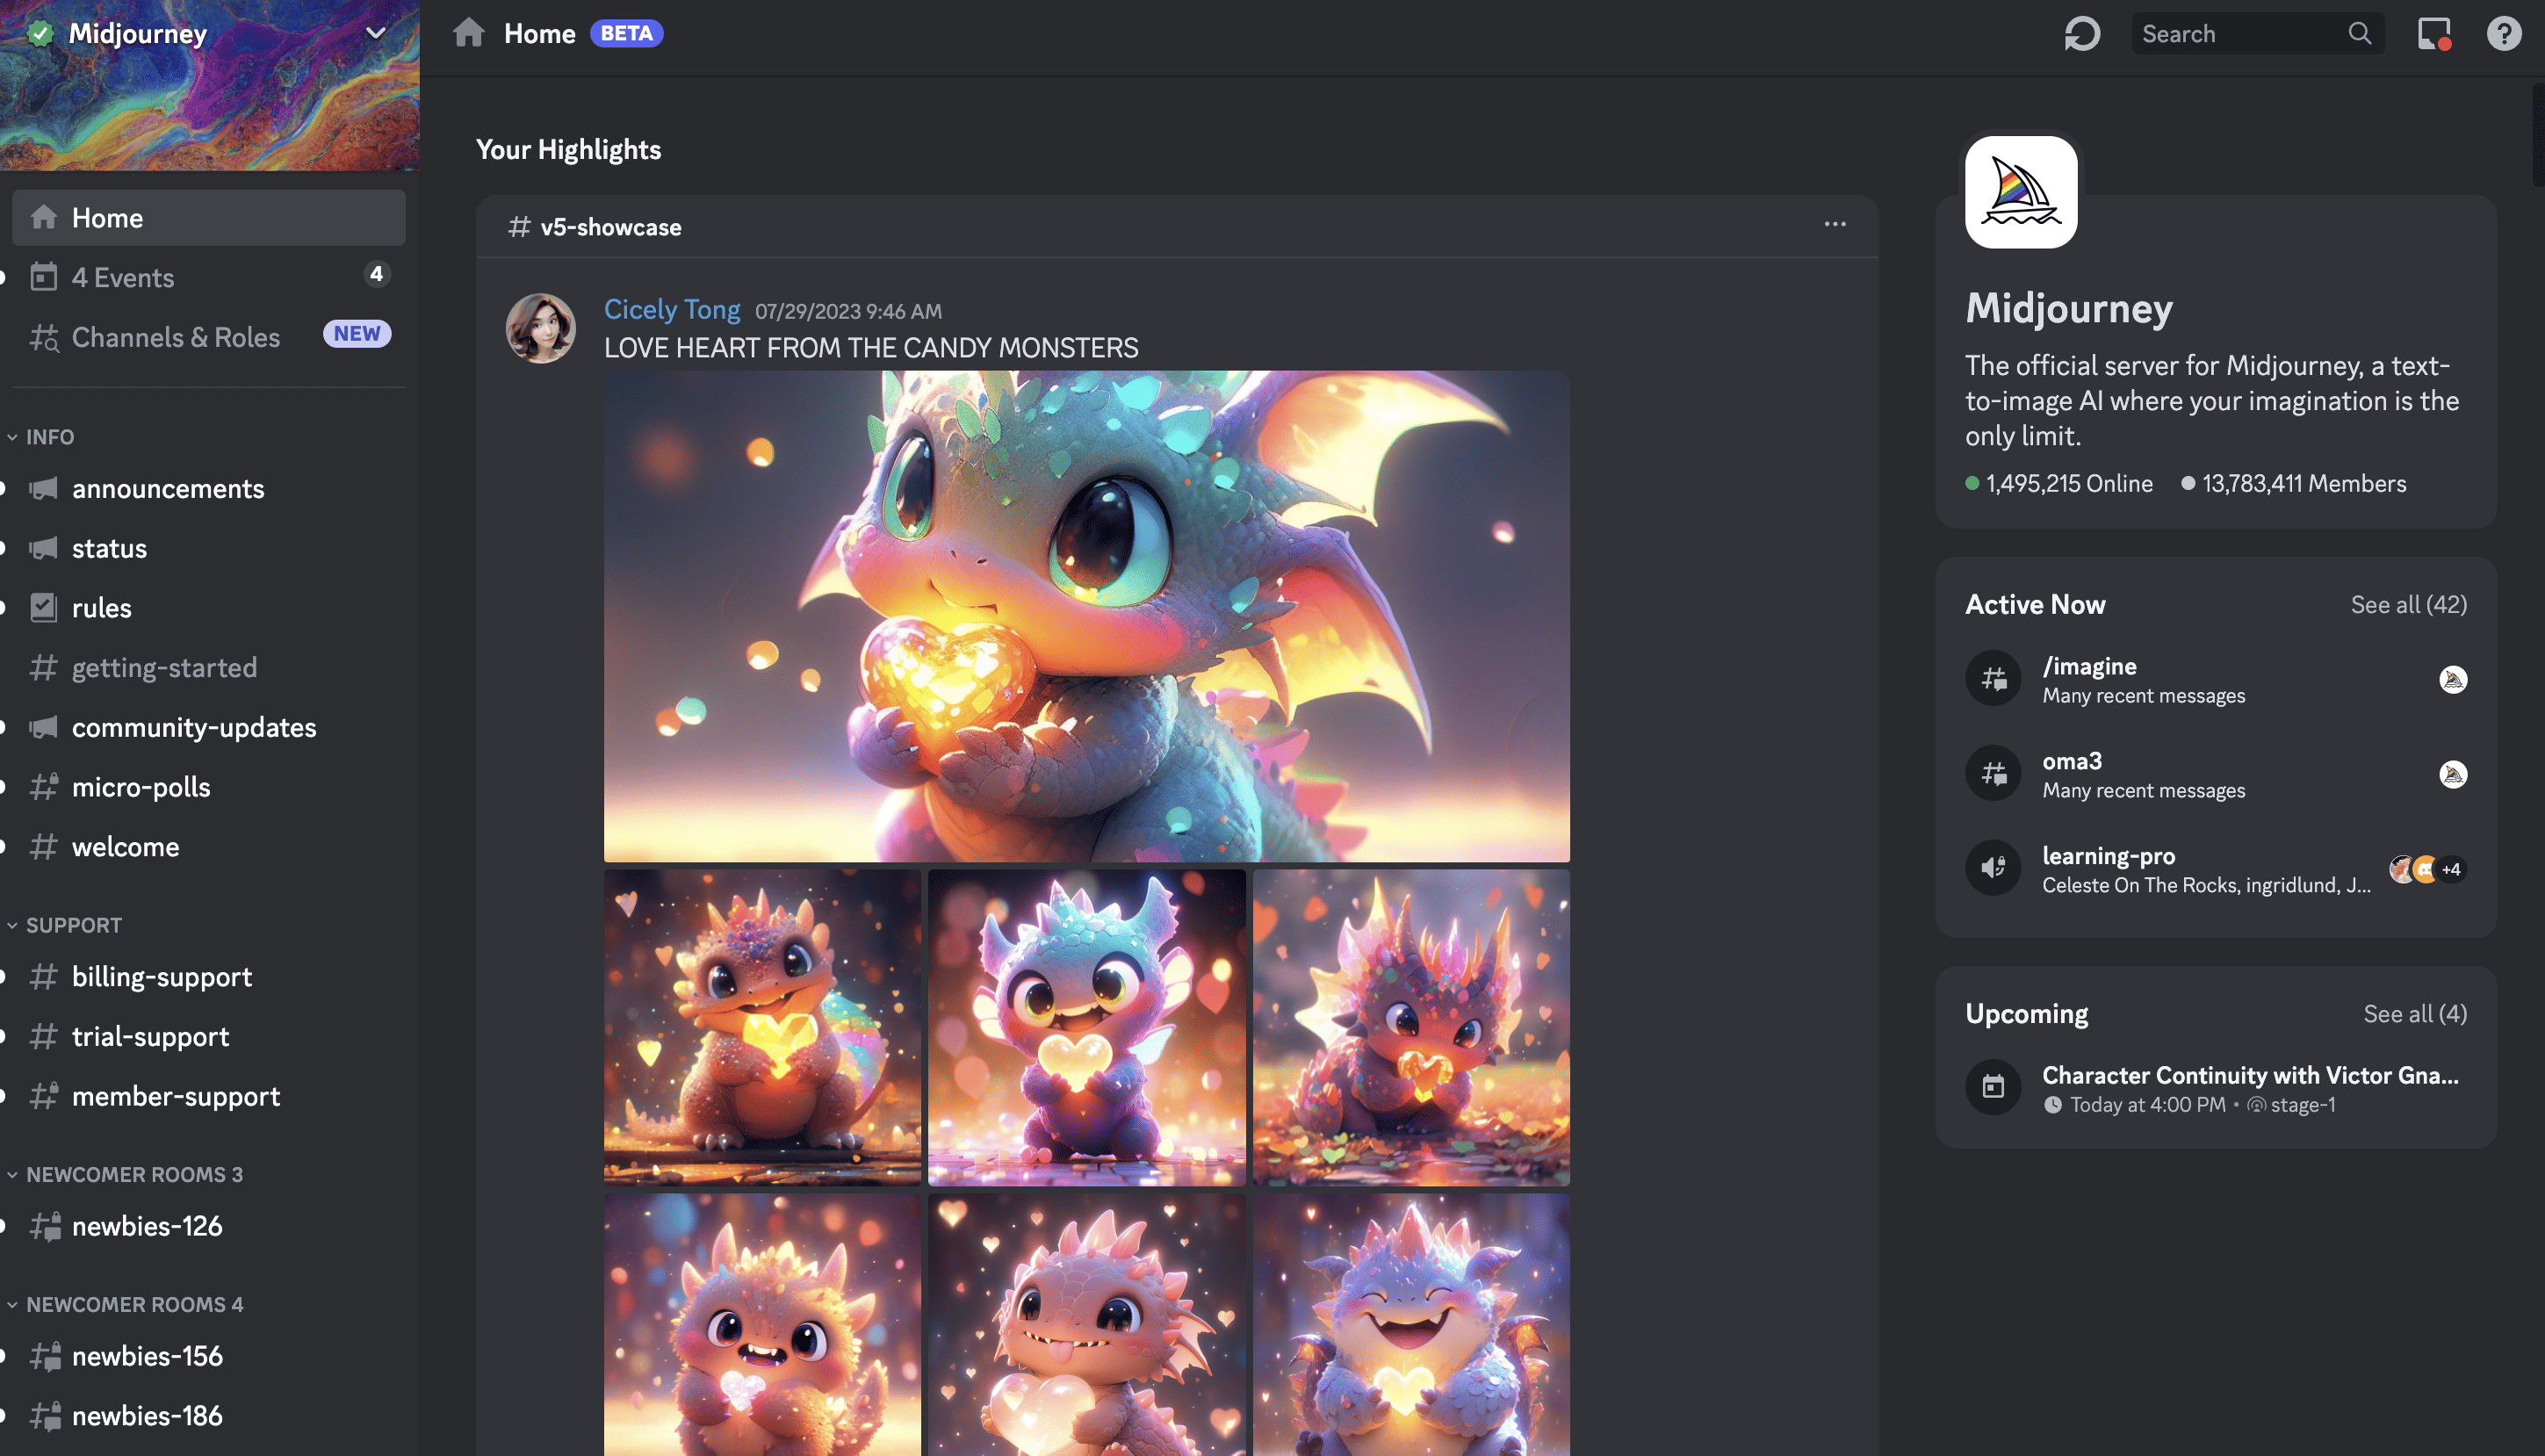 An image of the default home page on the Midjourney discord server